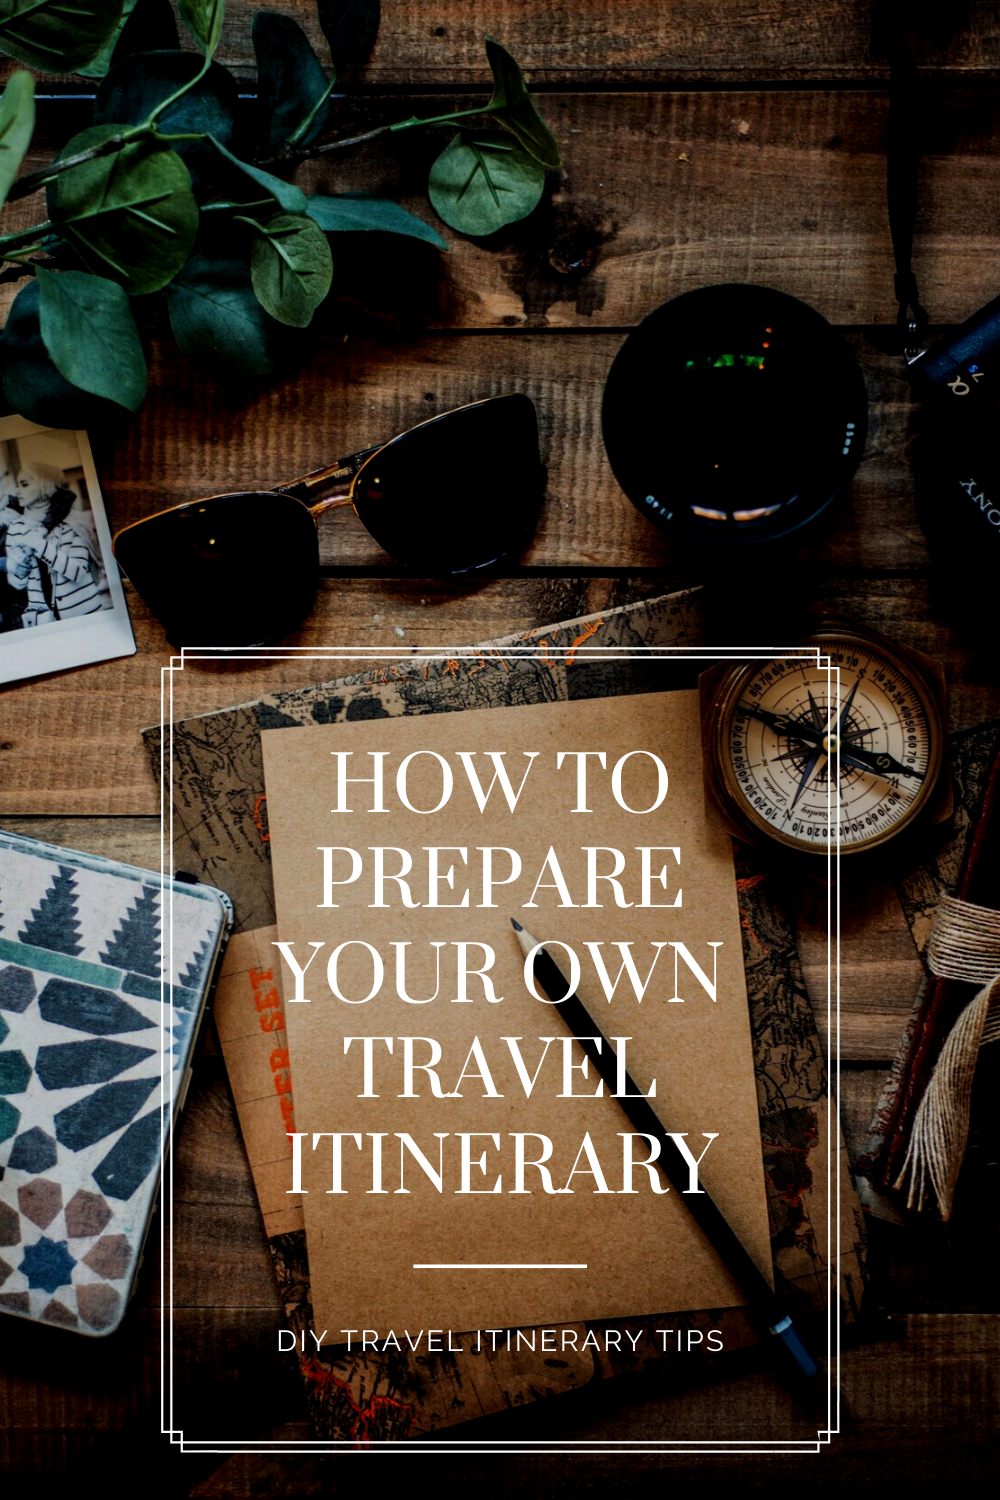 DIY Travel Itinerary Tips - How to Prepare Your Own Travel Itinerary.png